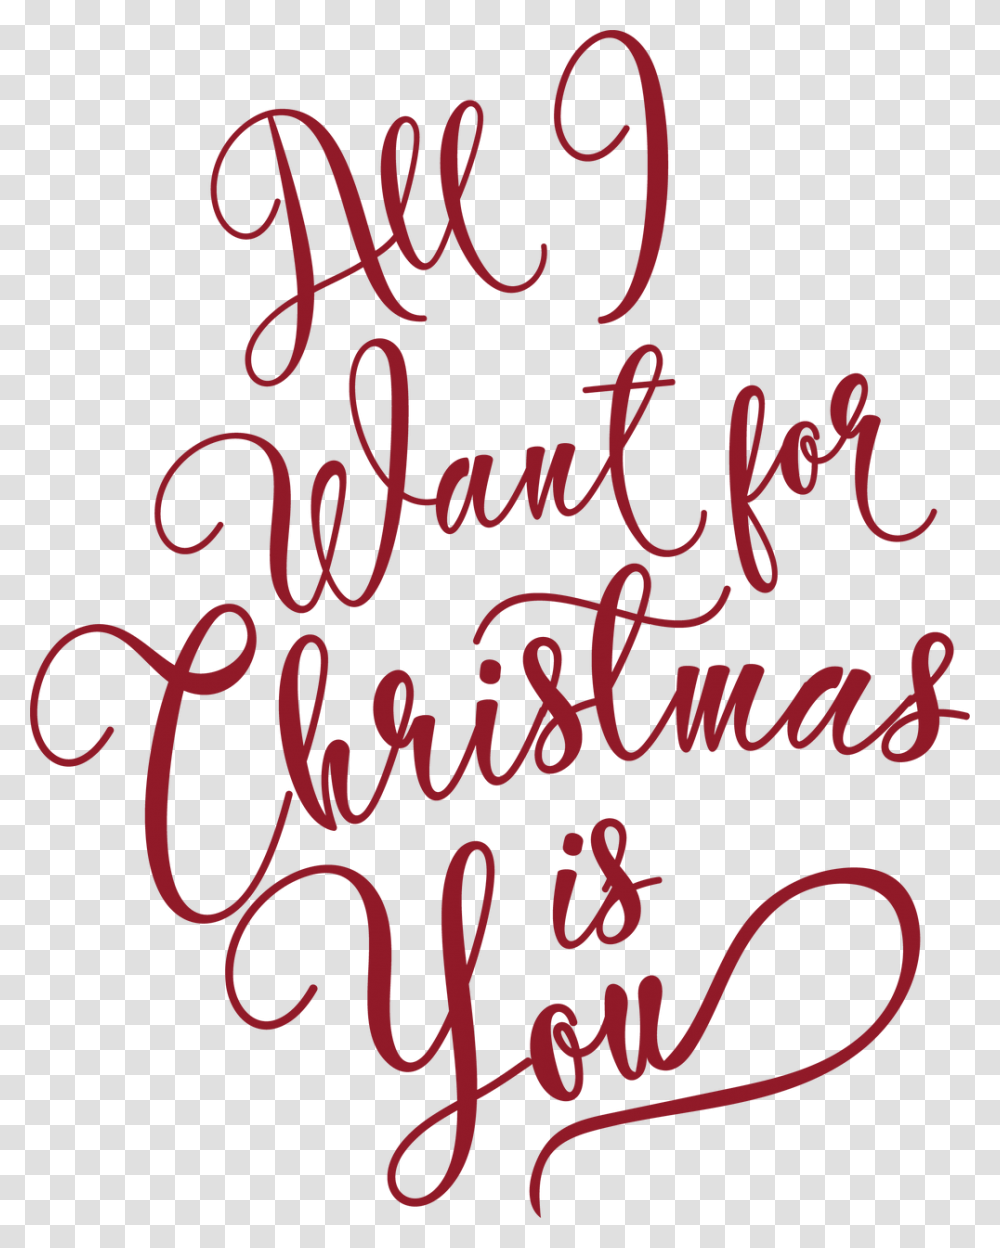 All I Want For Christmas Is You Svg Cut File Calligraphy, Handwriting, Poster, Advertisement Transparent Png